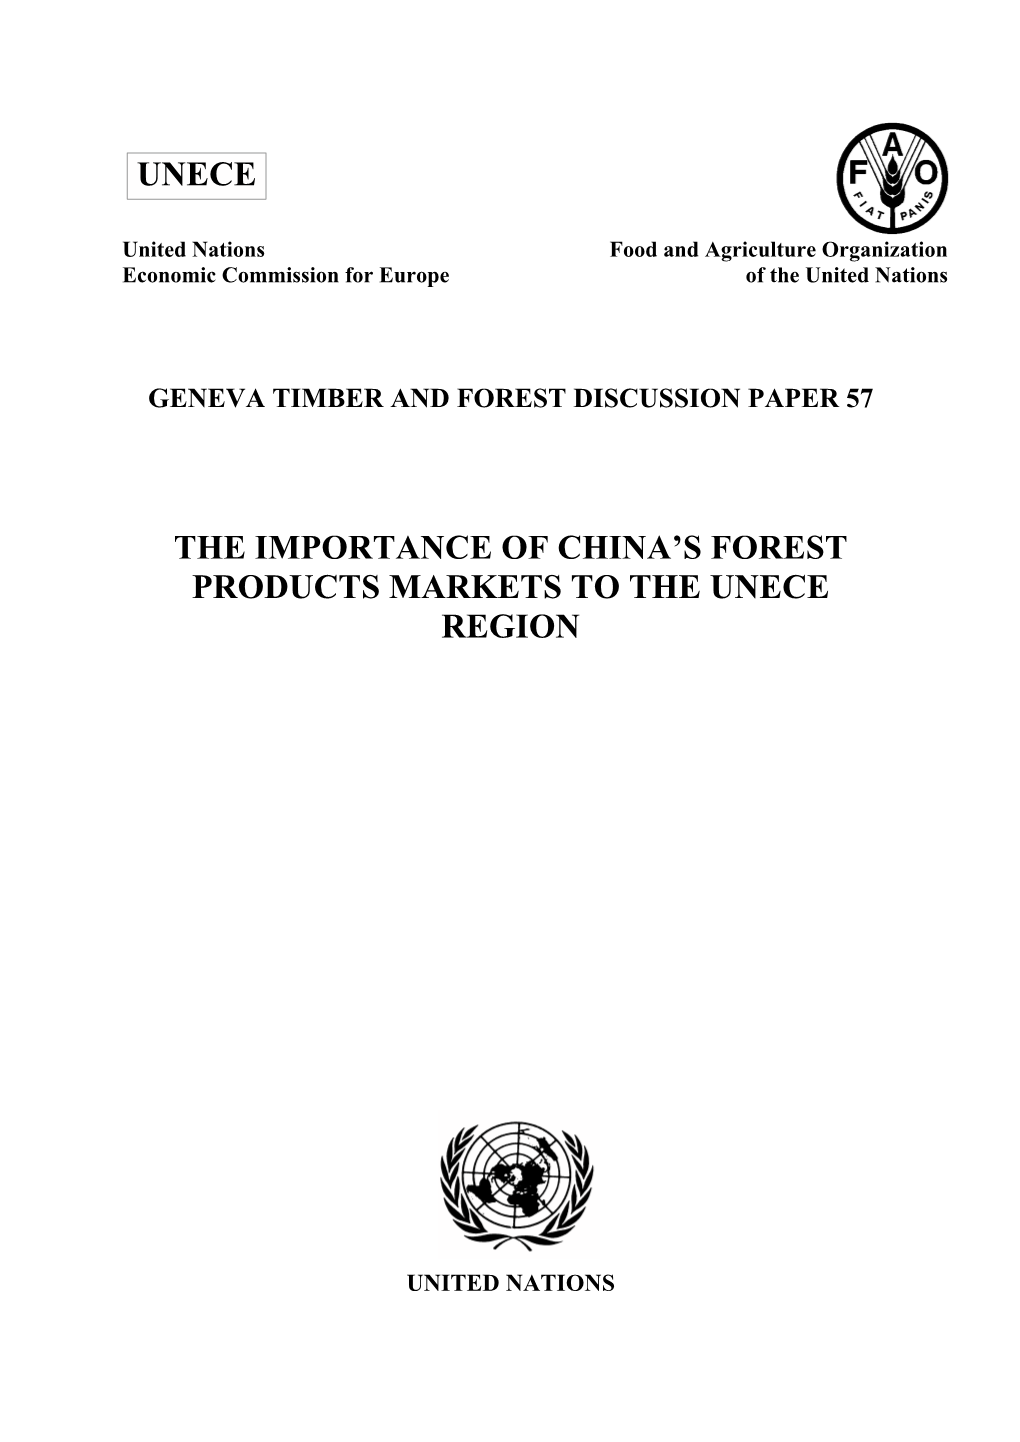 The Importance of China's Forest Products Markets